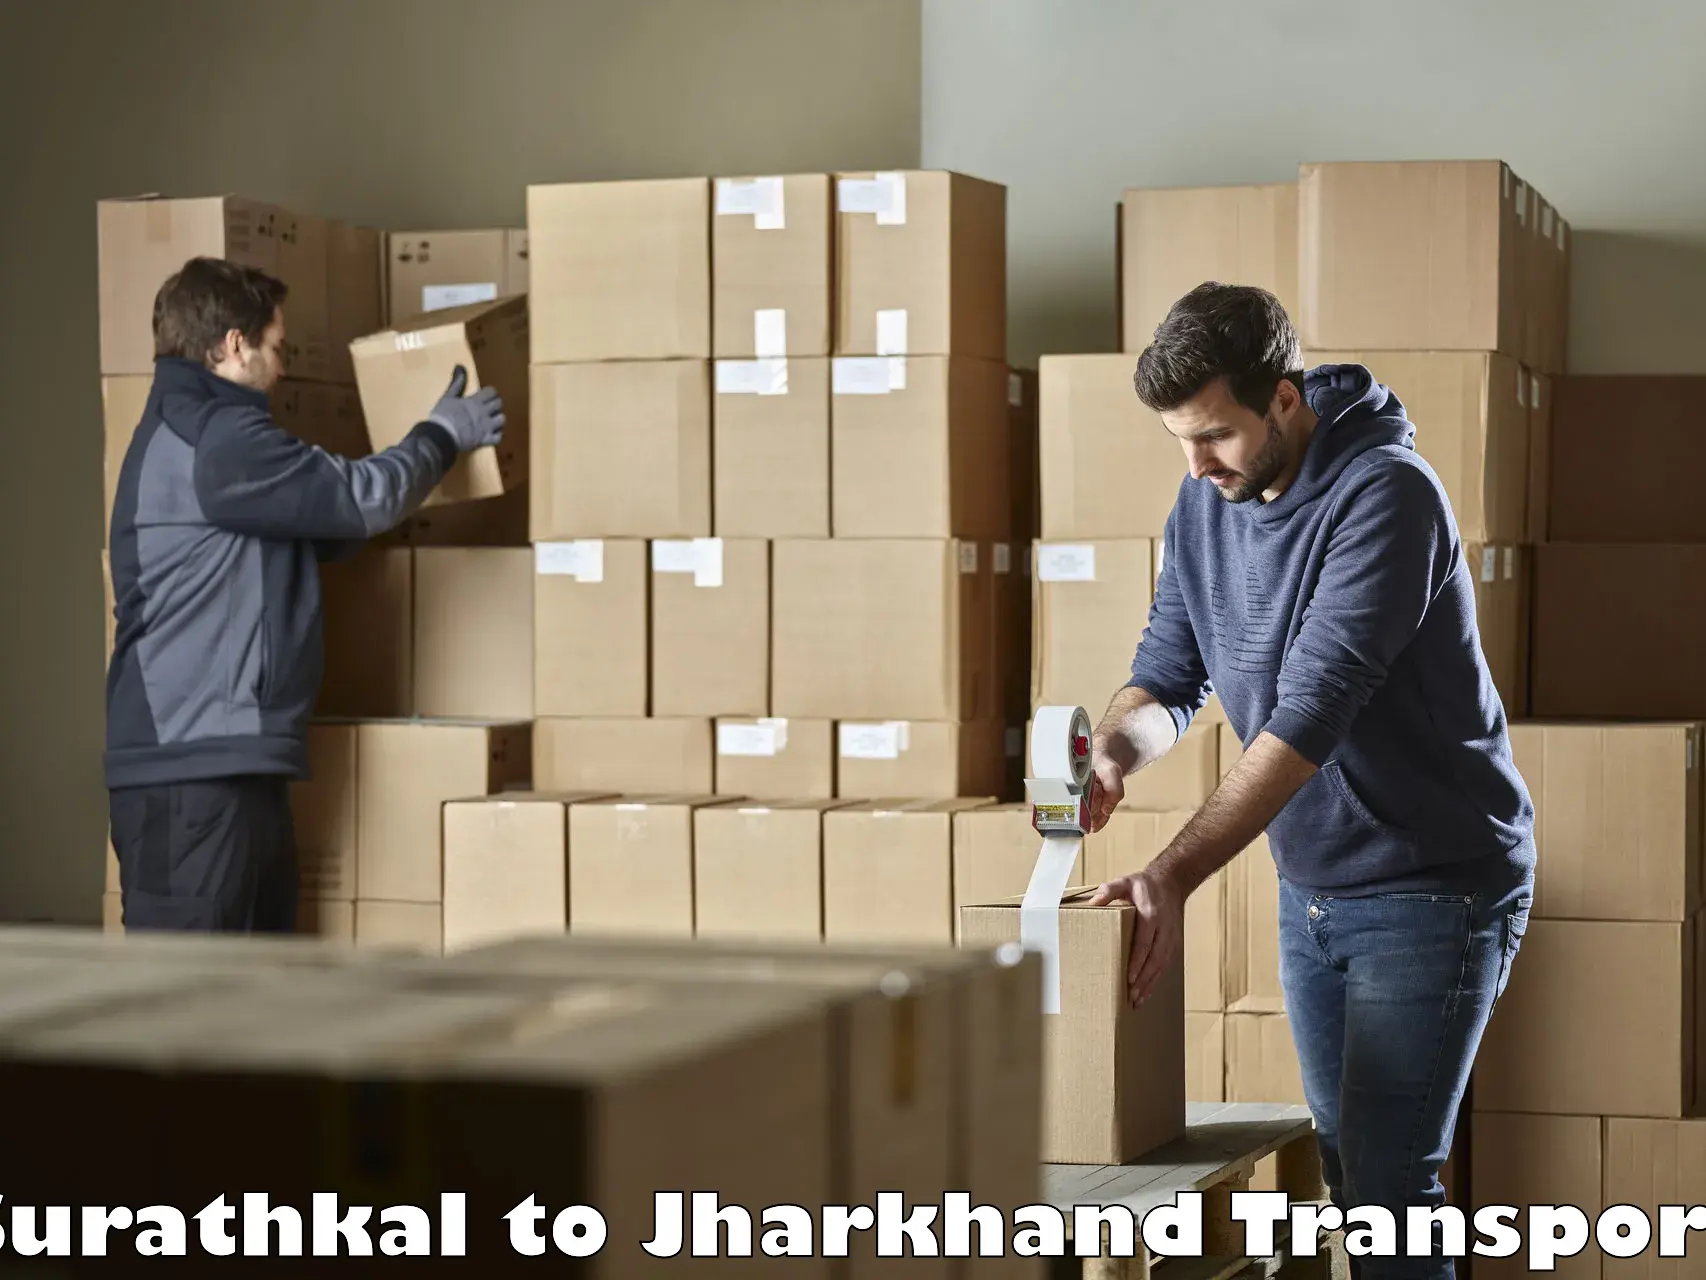 Truck transport companies in India Surathkal to Jharkhand